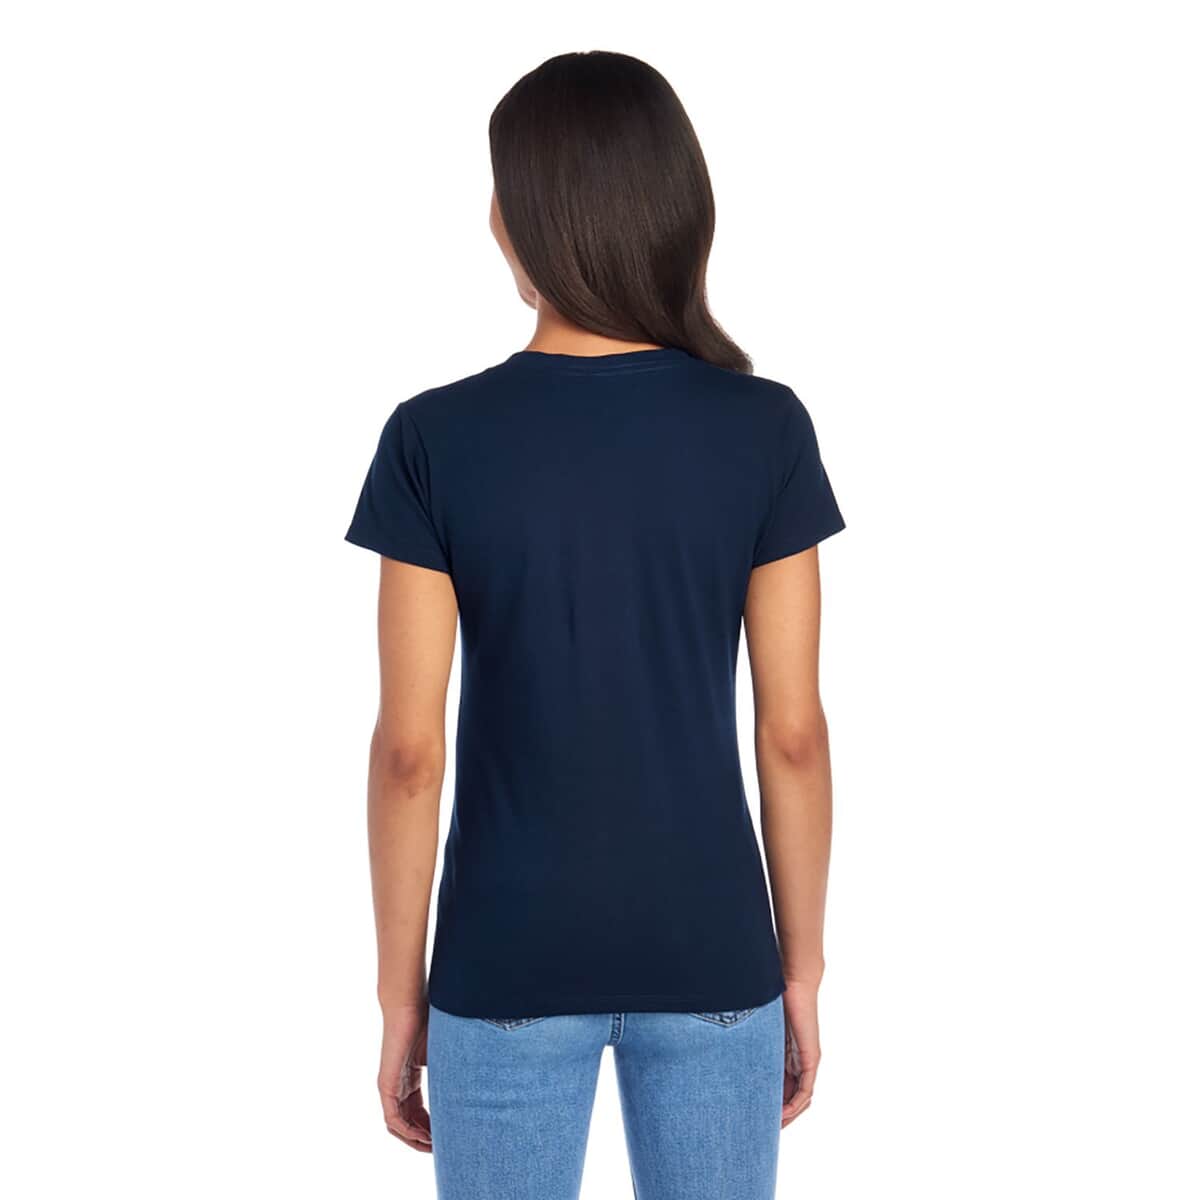 2 Pack- FRUIT OF THE LOOM 100% Cotton V-Neck T-shirts - Navy and Plum-L (Shipped in 8-10 days) image number 3